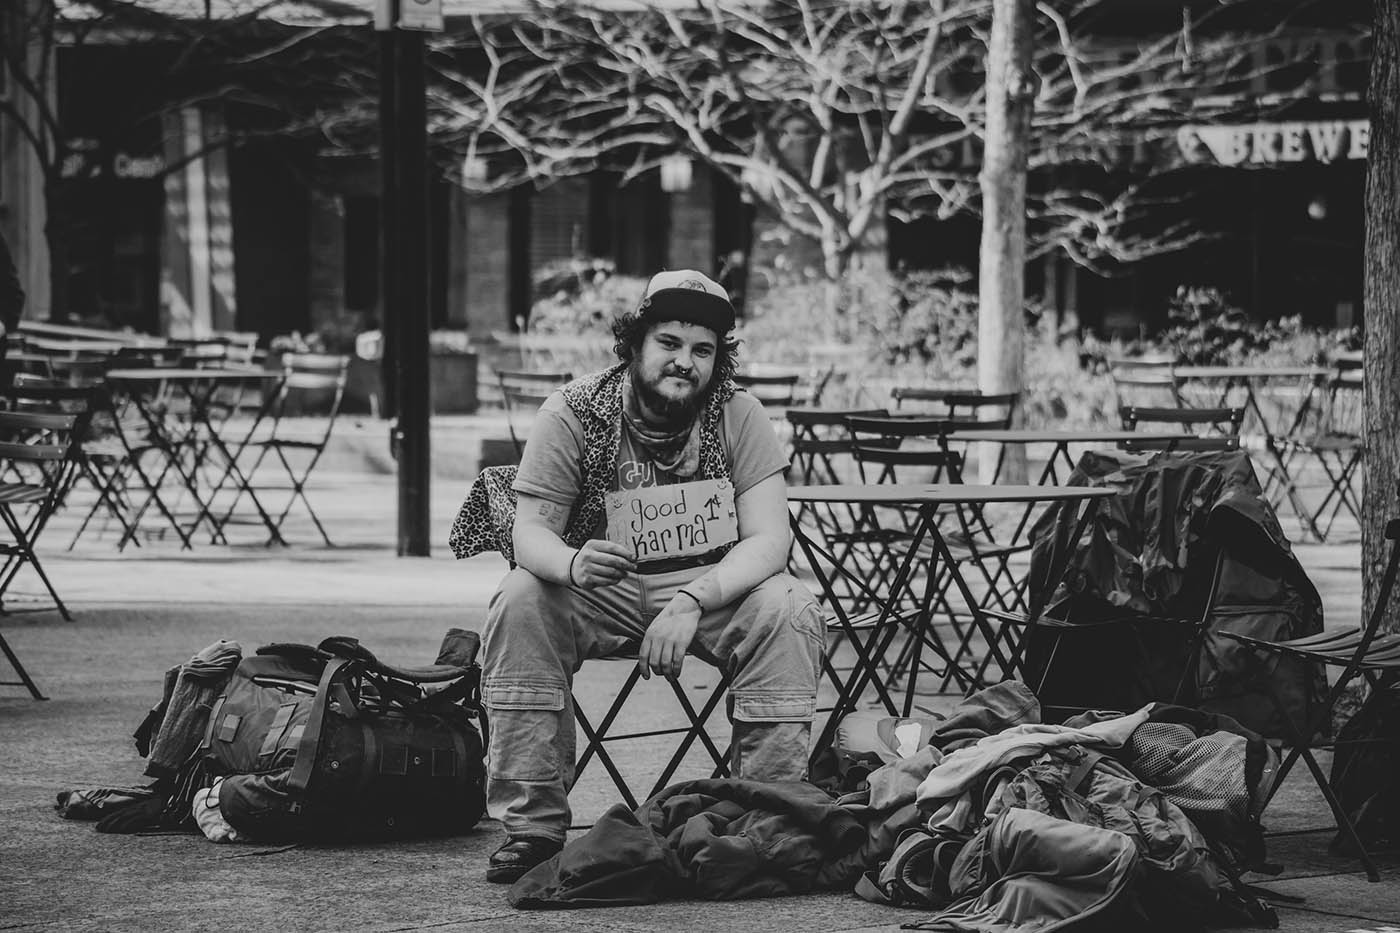 Begpacking: How to Pay for Your Travels by Begging and Busking - Pay for your backpacking travels by begging on the street.